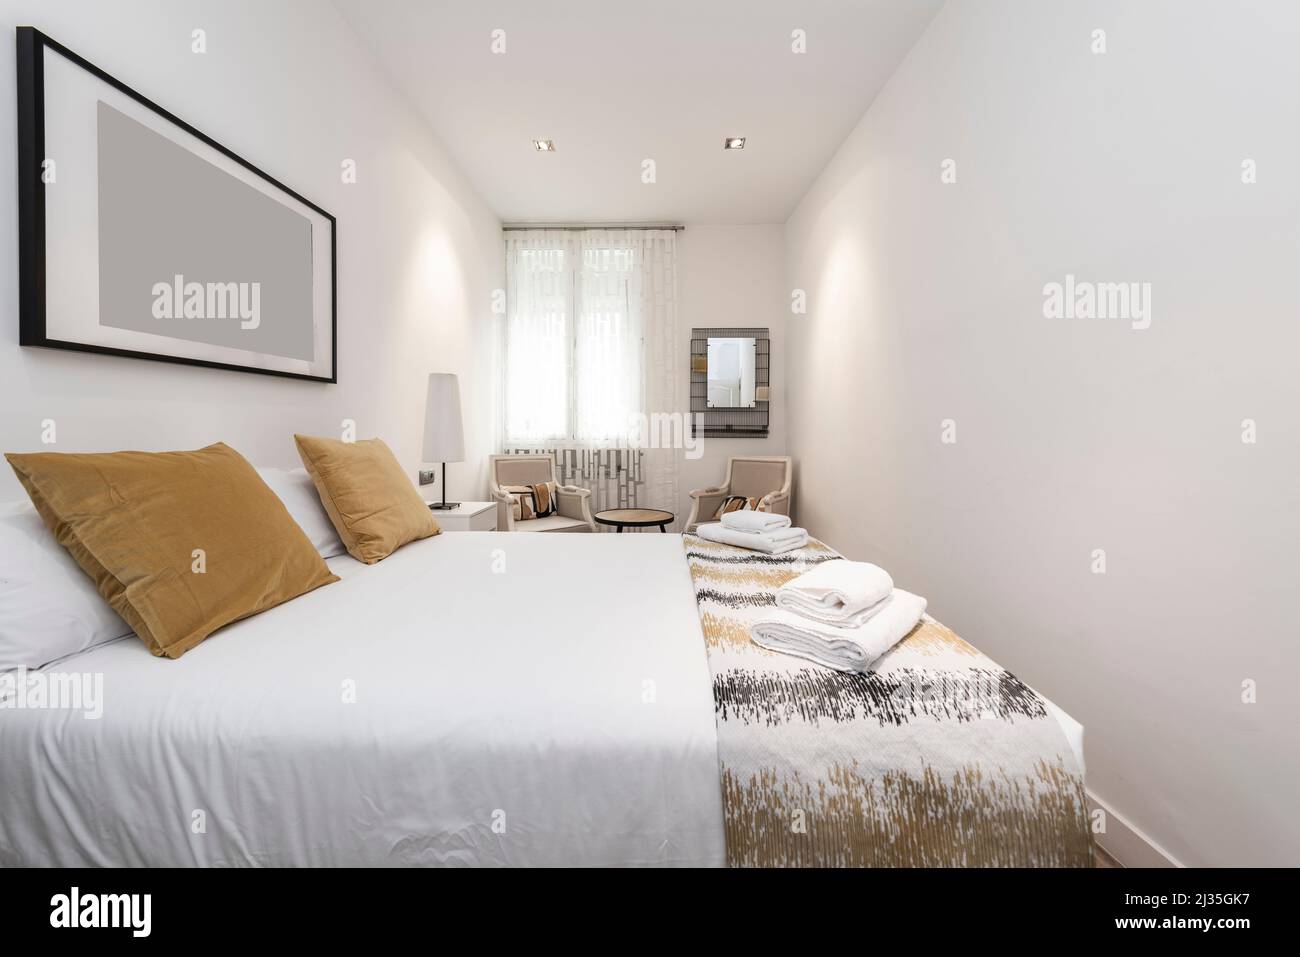 Bedroom with a large double bed with golden cushions, armchairs and towels on the bed in a vacation rental apartment Stock Photo